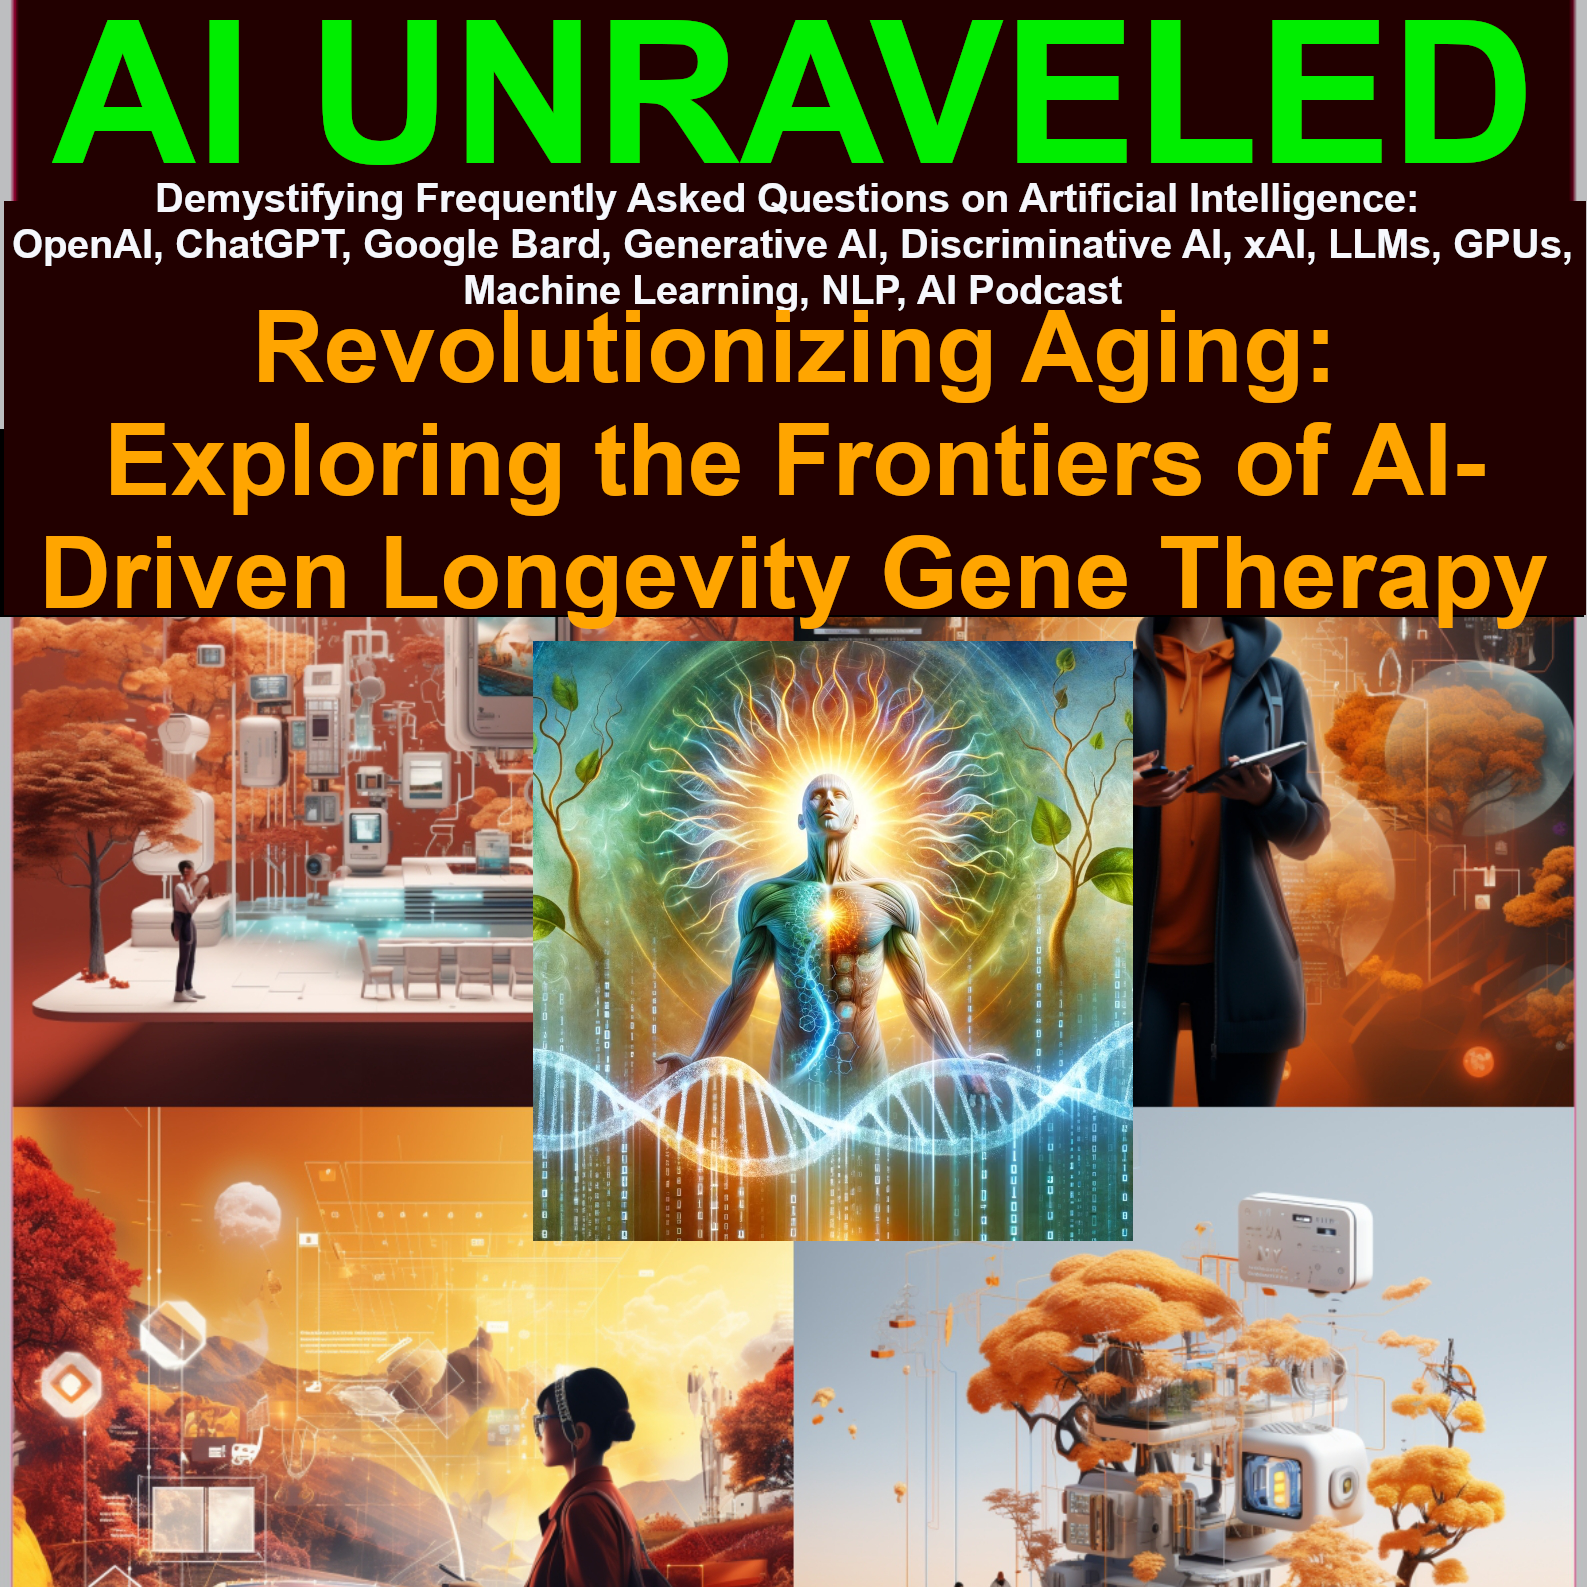 Revolutionizing Aging: Exploring the Frontiers of AI-Driven Longevity Gene Therapy